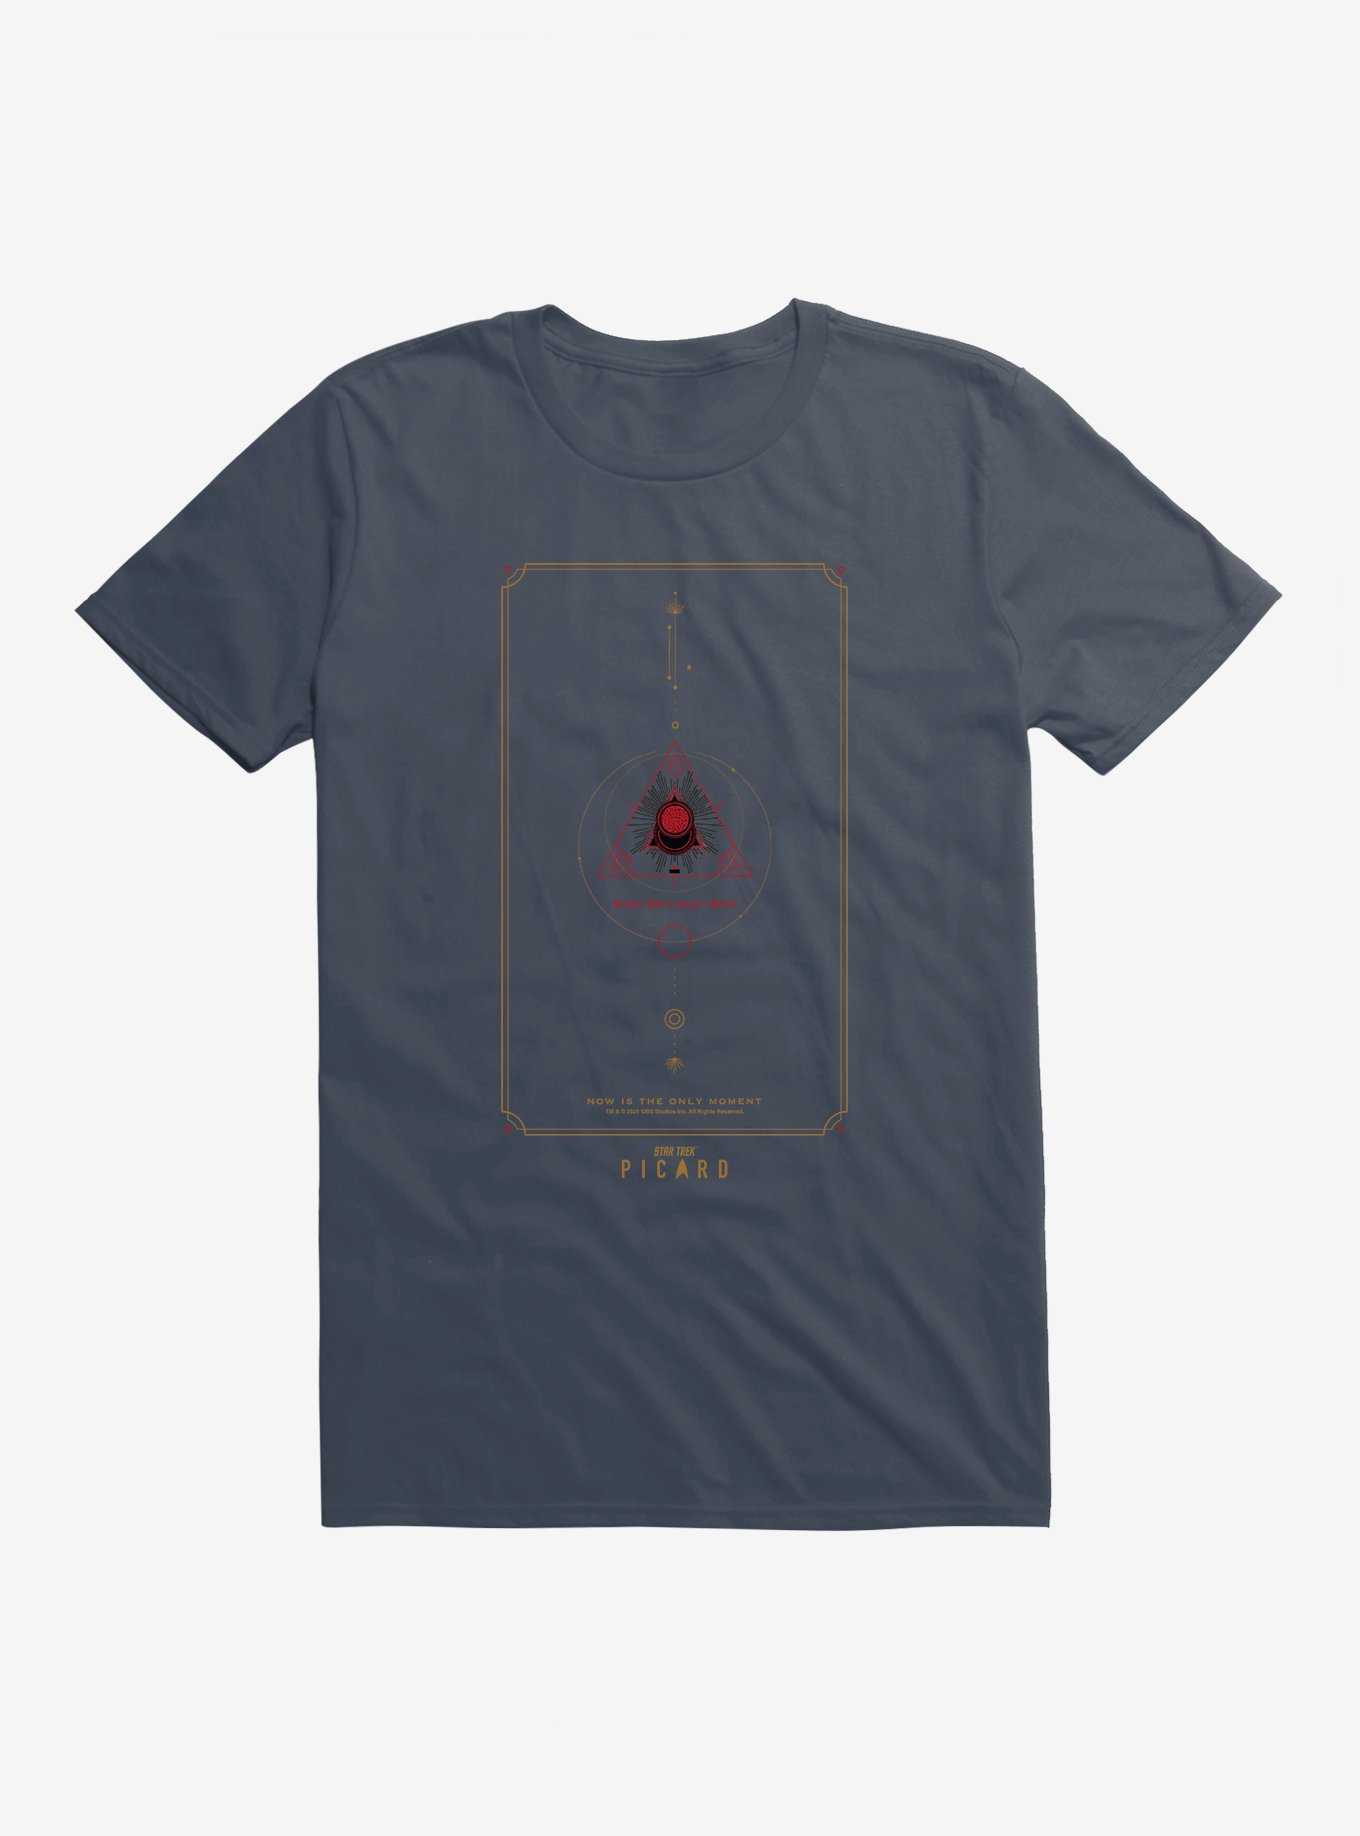 Star Trek: Picard Now Is The Only Moment T-Shirt, , hi-res